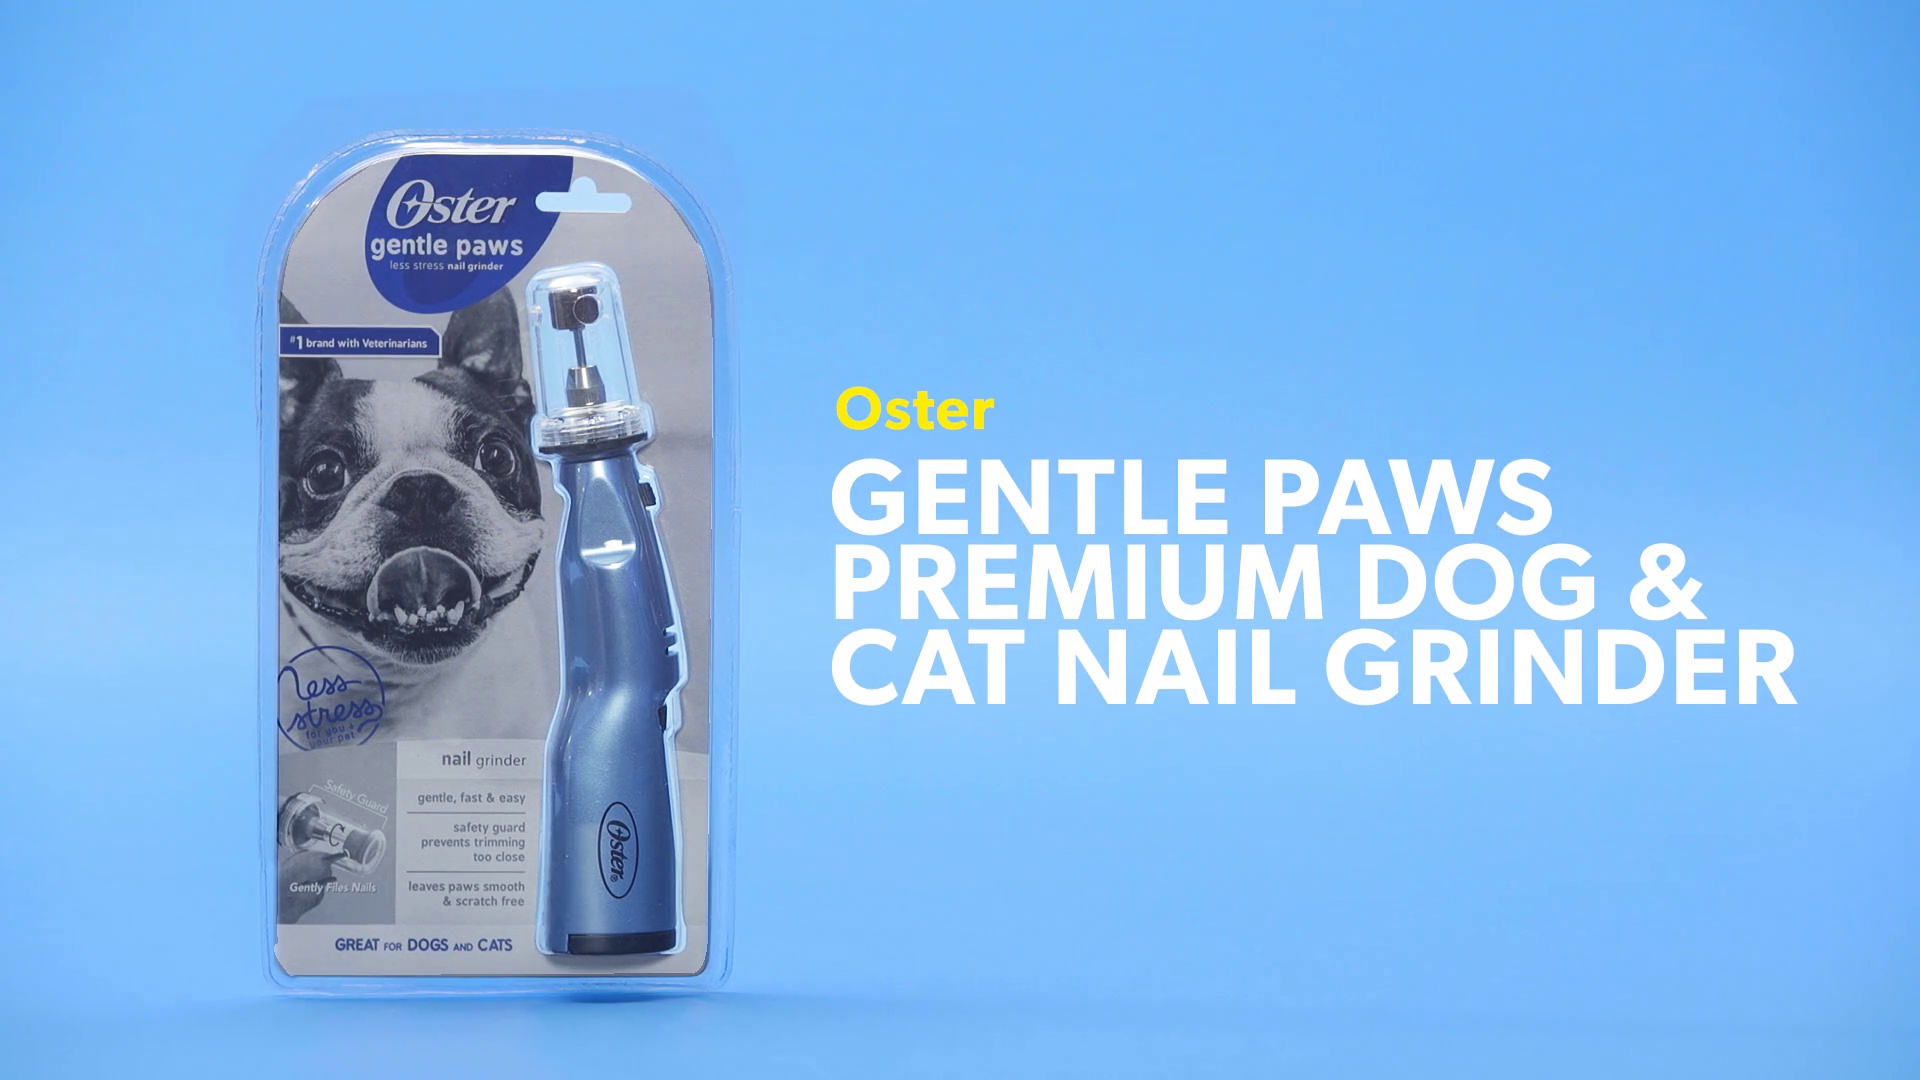 oster gentle paws nail trimmer